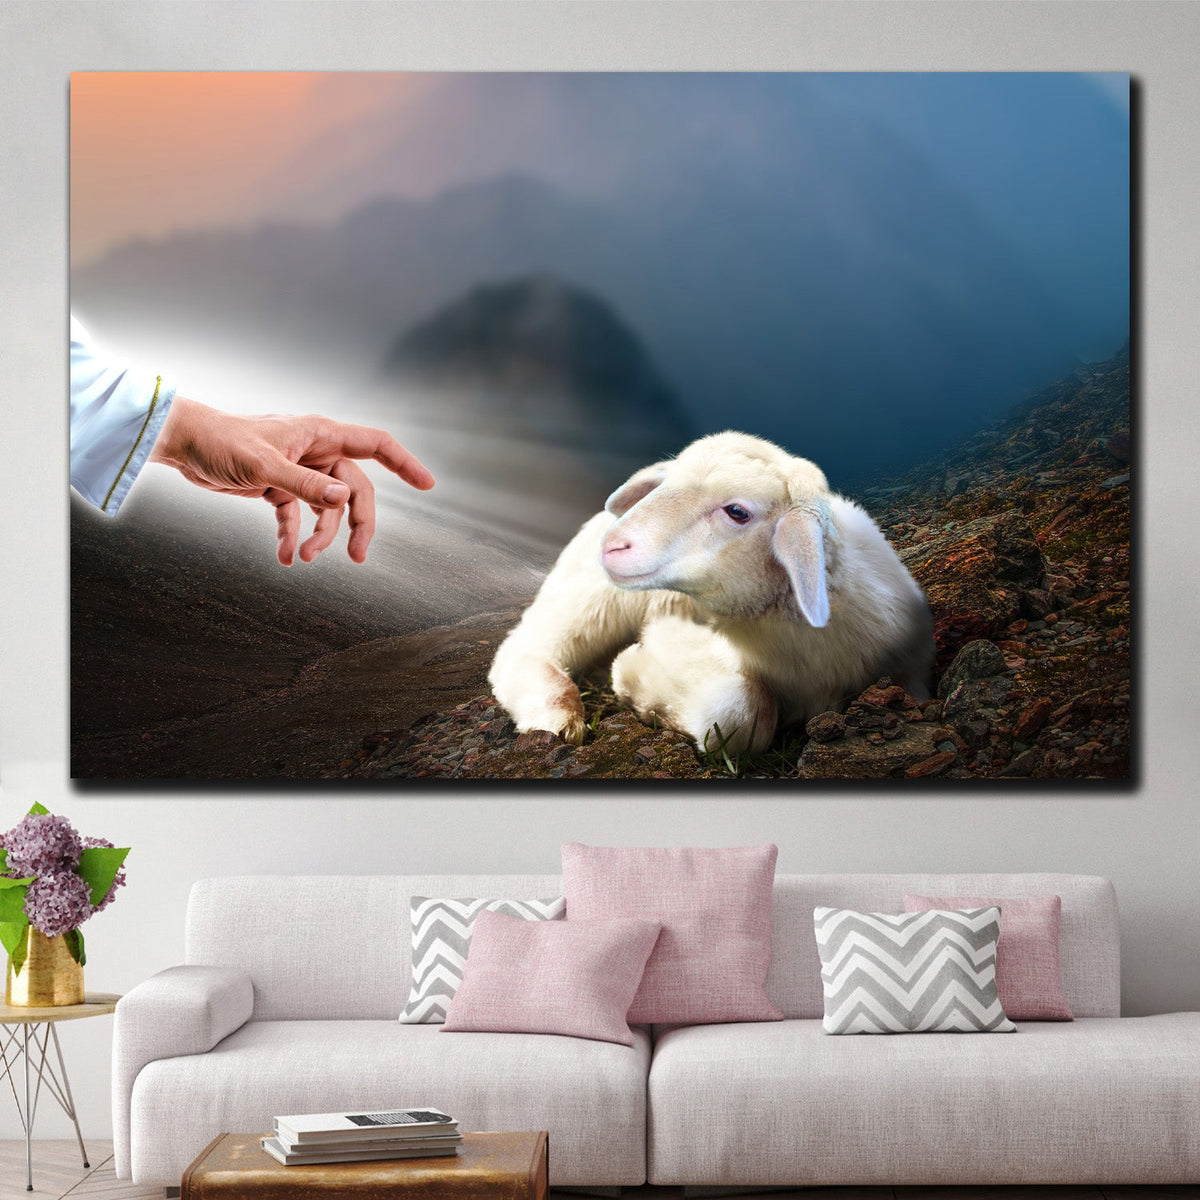 https://cdn.shopify.com/s/files/1/0387/9986/8044/products/TheLostLambCanvasArtprintStretched-2.jpg